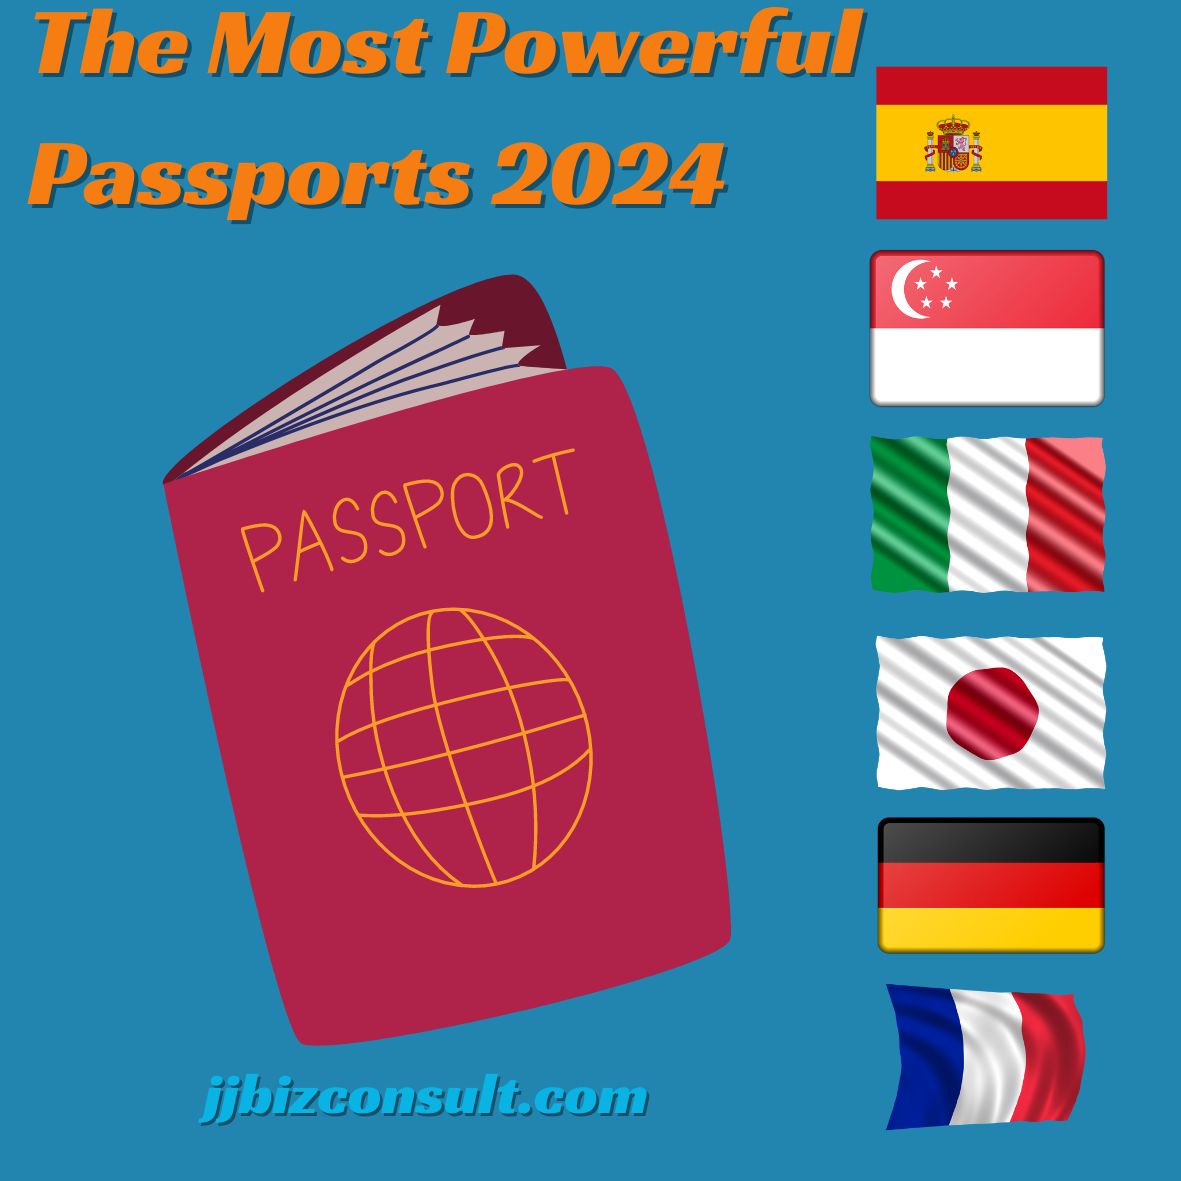 The Most Powerful Passport in World 2024